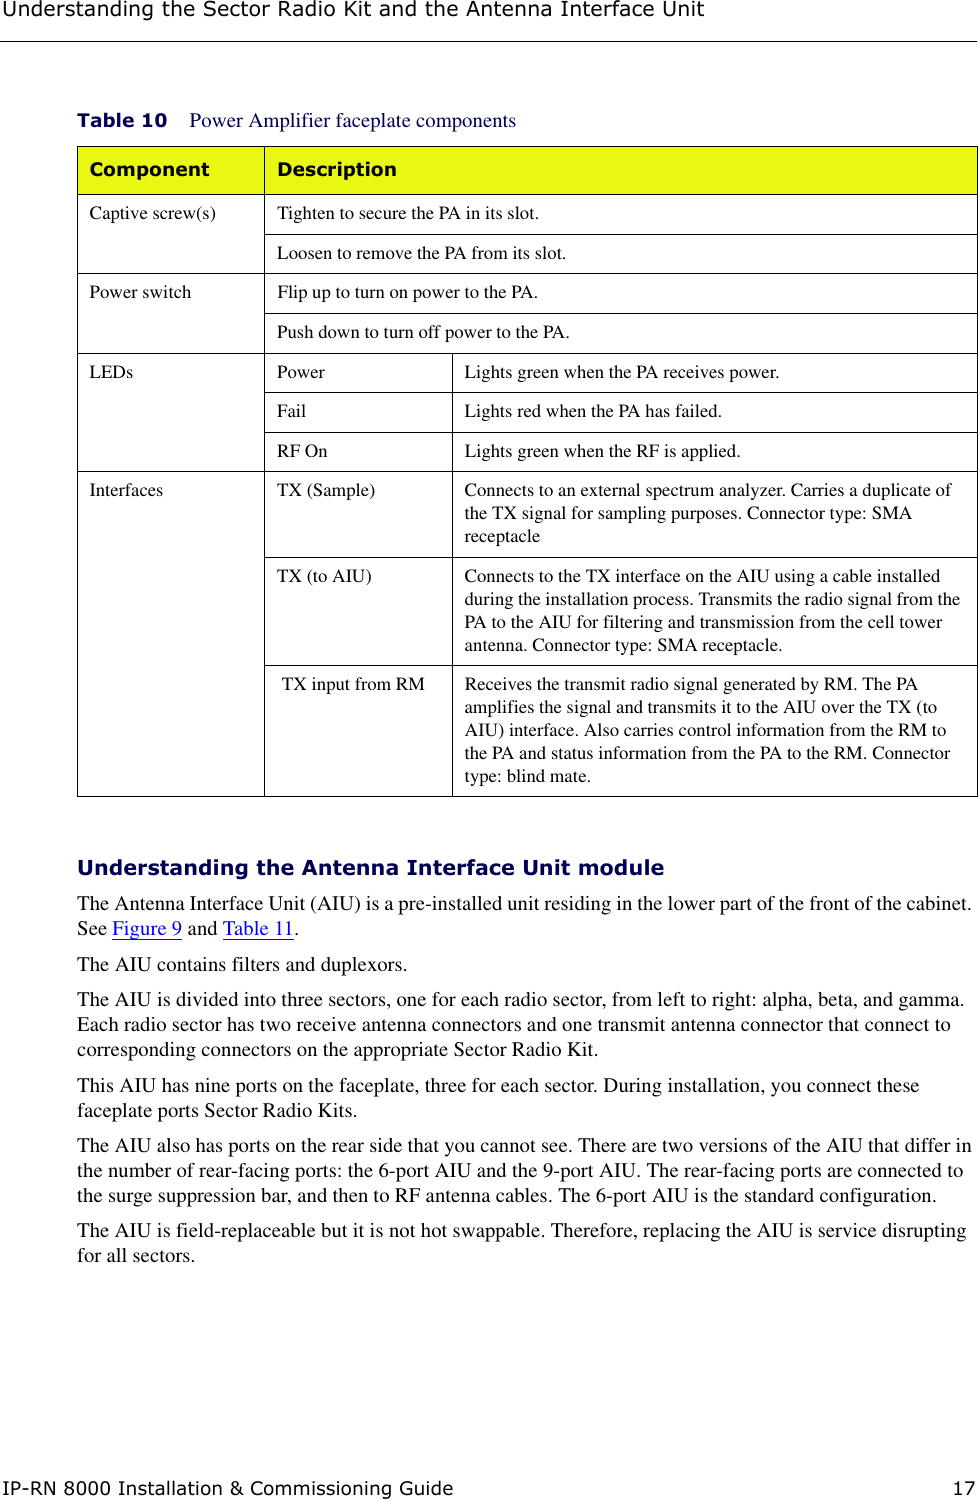 Understanding the Sector Radio Kit and the Antenna Interface UnitIP-RN 8000 Installation &amp; Commissioning Guide 17Understanding the Antenna Interface Unit moduleThe Antenna Interface Unit (AIU) is a pre-installed unit residing in the lower part of the front of the cabinet. See Figure 9 and Table 11.The AIU contains filters and duplexors. The AIU is divided into three sectors, one for each radio sector, from left to right: alpha, beta, and gamma. Each radio sector has two receive antenna connectors and one transmit antenna connector that connect to corresponding connectors on the appropriate Sector Radio Kit.This AIU has nine ports on the faceplate, three for each sector. During installation, you connect these faceplate ports Sector Radio Kits.The AIU also has ports on the rear side that you cannot see. There are two versions of the AIU that differ in the number of rear-facing ports: the 6-port AIU and the 9-port AIU. The rear-facing ports are connected to the surge suppression bar, and then to RF antenna cables. The 6-port AIU is the standard configuration. The AIU is field-replaceable but it is not hot swappable. Therefore, replacing the AIU is service disrupting for all sectors.Table 10 Power Amplifier faceplate componentsComponent DescriptionCaptive screw(s) Tighten to secure the PA in its slot.Loosen to remove the PA from its slot.Power switch Flip up to turn on power to the PA.Push down to turn off power to the PA.LEDs Power Lights green when the PA receives power.Fail Lights red when the PA has failed.RF On Lights green when the RF is applied.Interfaces TX (Sample) Connects to an external spectrum analyzer. Carries a duplicate of the TX signal for sampling purposes. Connector type: SMA receptacleTX (to AIU) Connects to the TX interface on the AIU using a cable installed during the installation process. Transmits the radio signal from the PA to the AIU for filtering and transmission from the cell tower antenna. Connector type: SMA receptacle. TX input from RM  Receives the transmit radio signal generated by RM. The PA amplifies the signal and transmits it to the AIU over the TX (to AIU) interface. Also carries control information from the RM to the PA and status information from the PA to the RM. Connector type: blind mate.